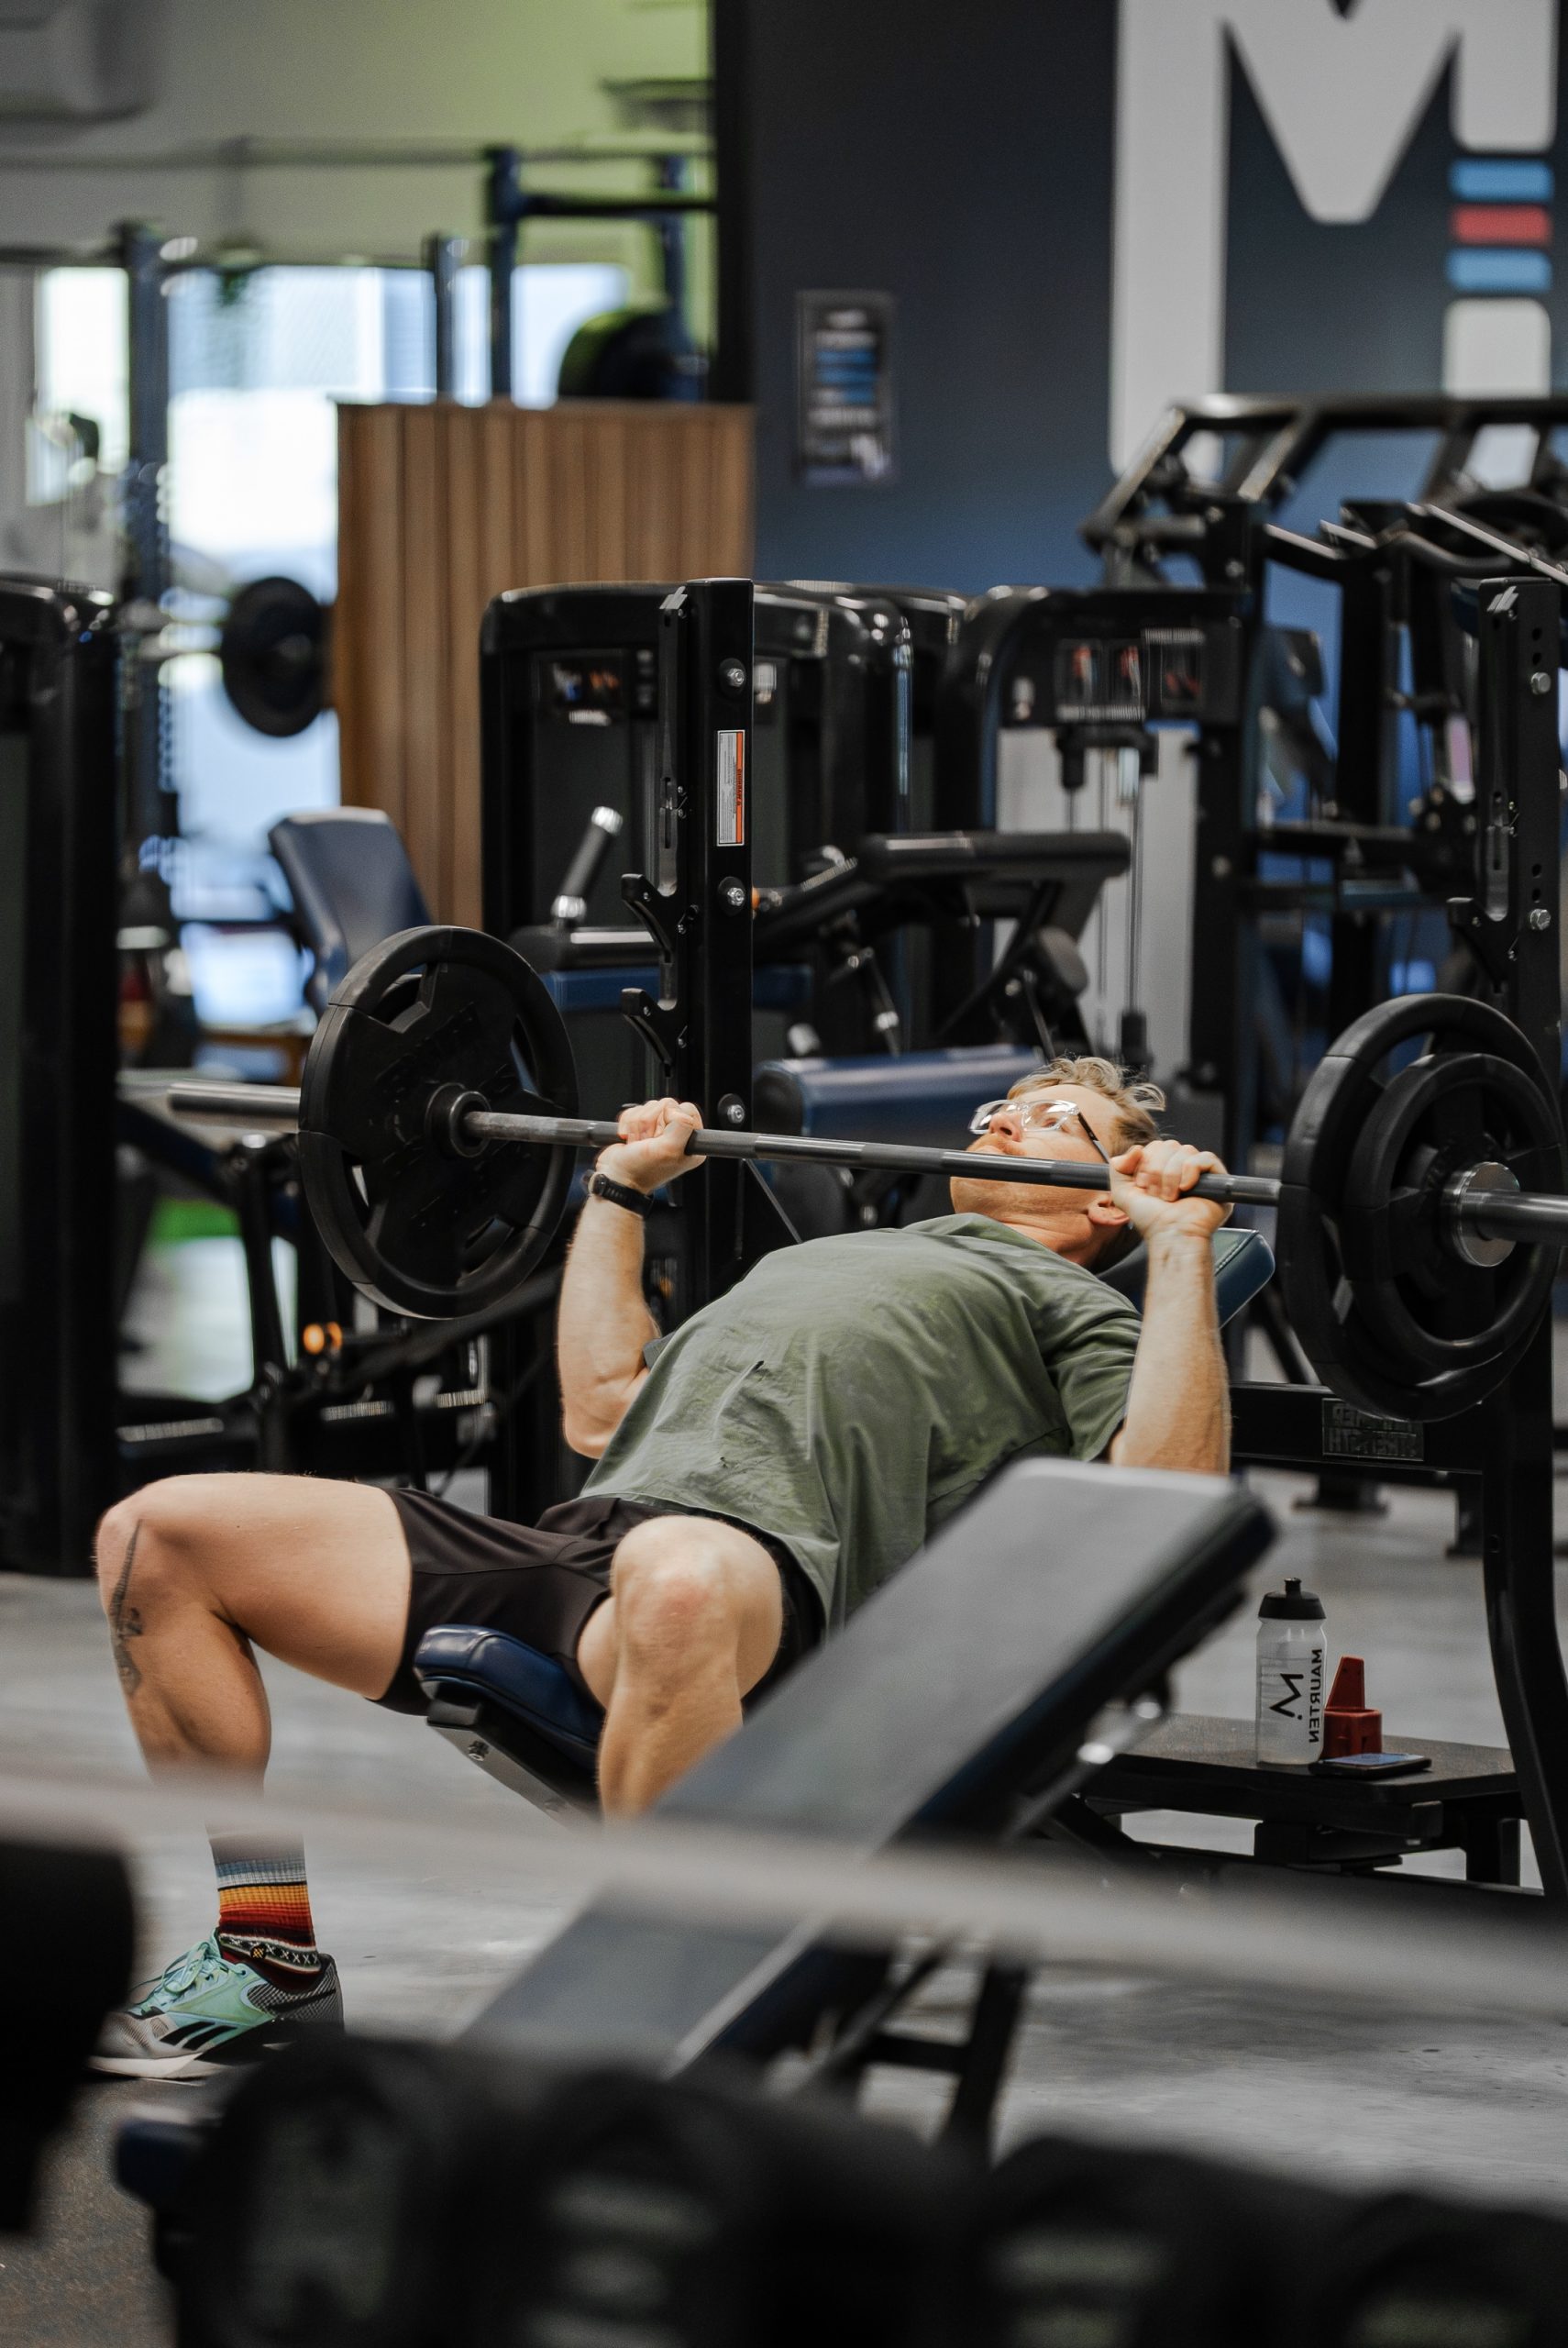 Pull up a bench and pump some iron in our Official Hammer Strength Training Centre.